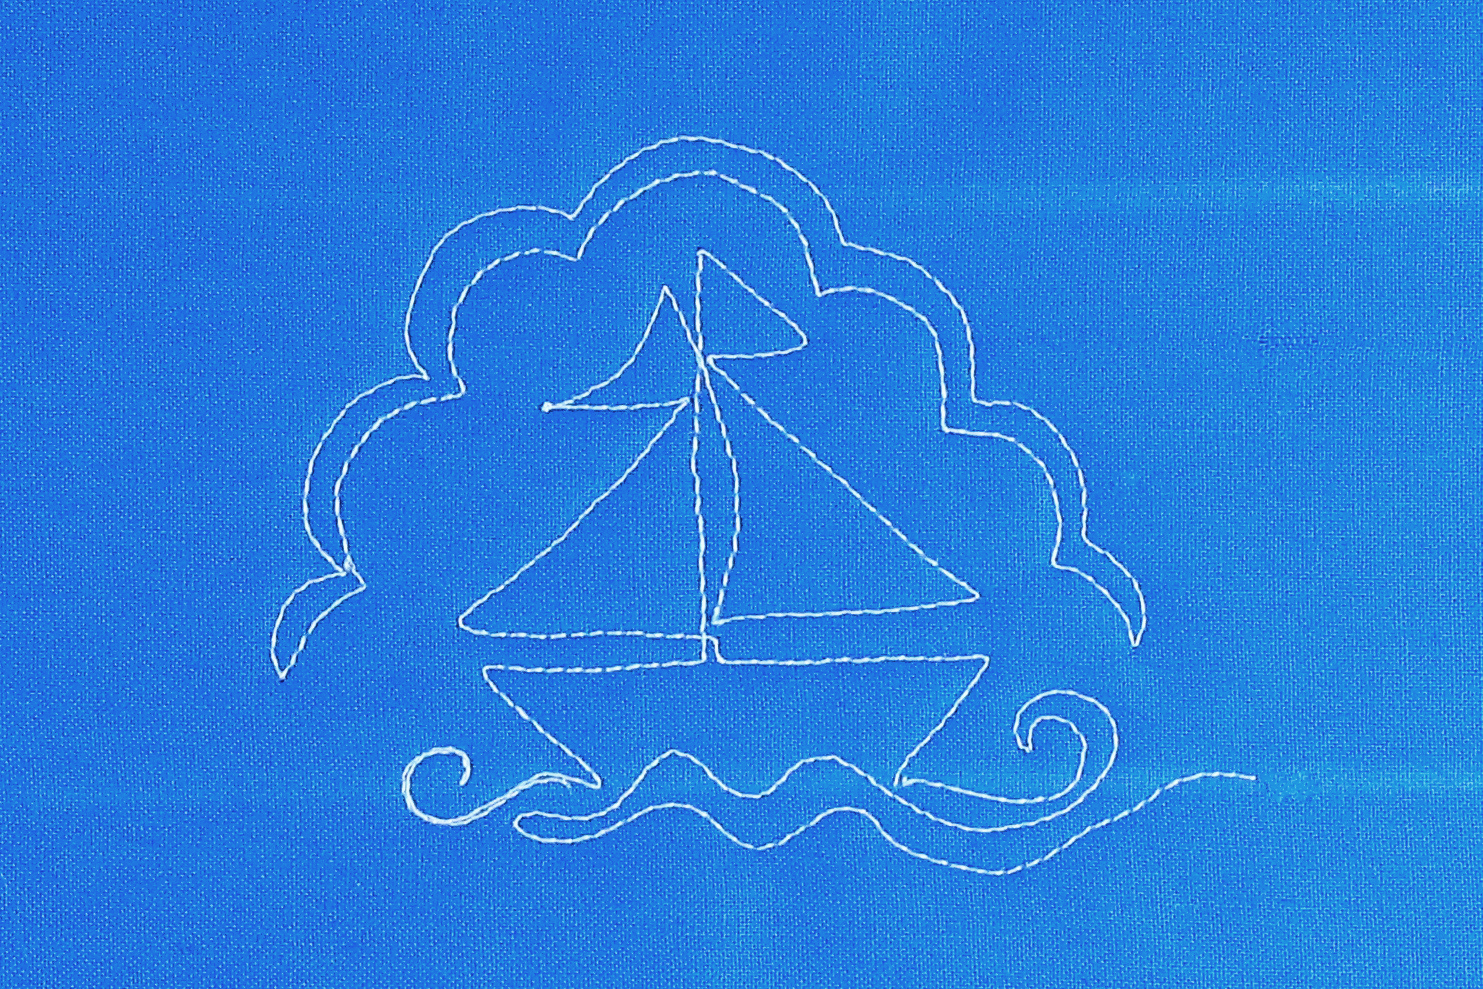 Free-motion Quilting Sailboats - create waves under the sailboat - add scallops for clouds